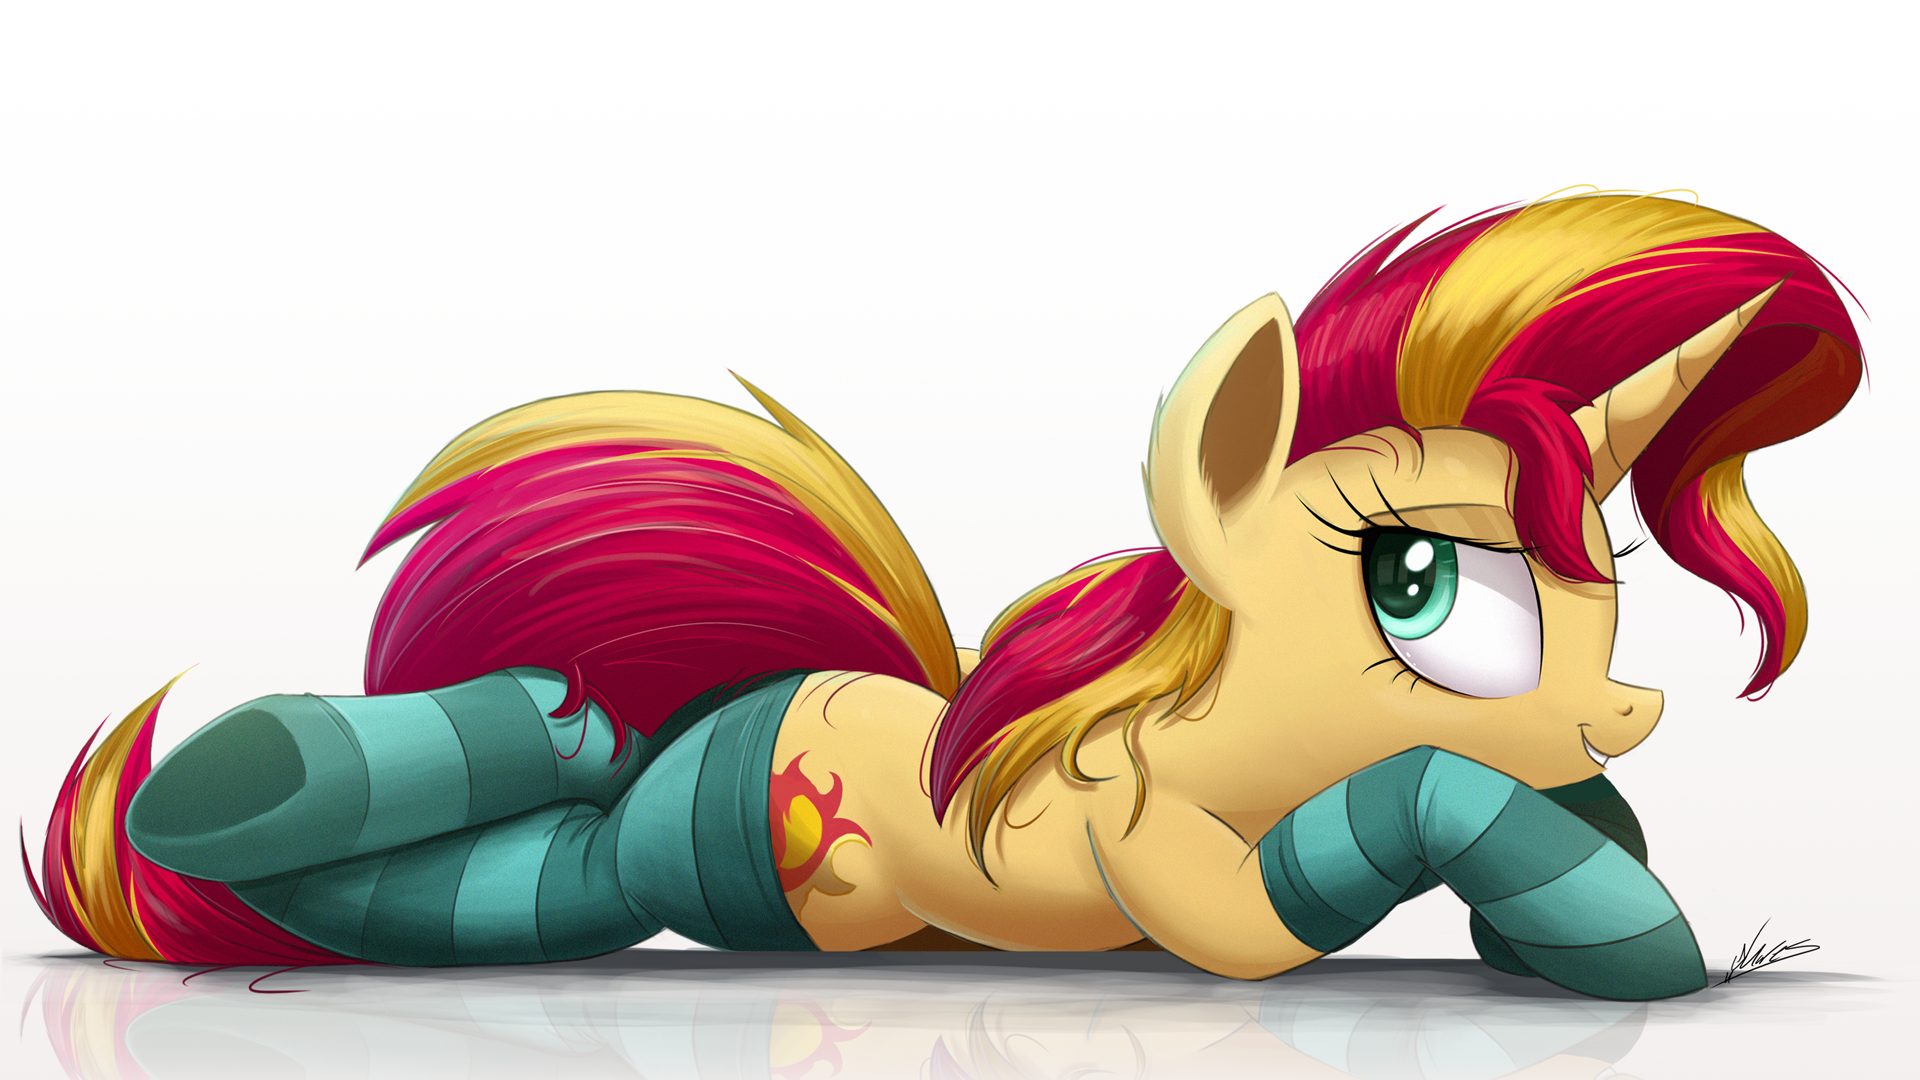 http://orig11.deviantart.net/aea8/f/2016/200/0/8/sunset_shimmer_pinup_by_ncmares-daakth6.png